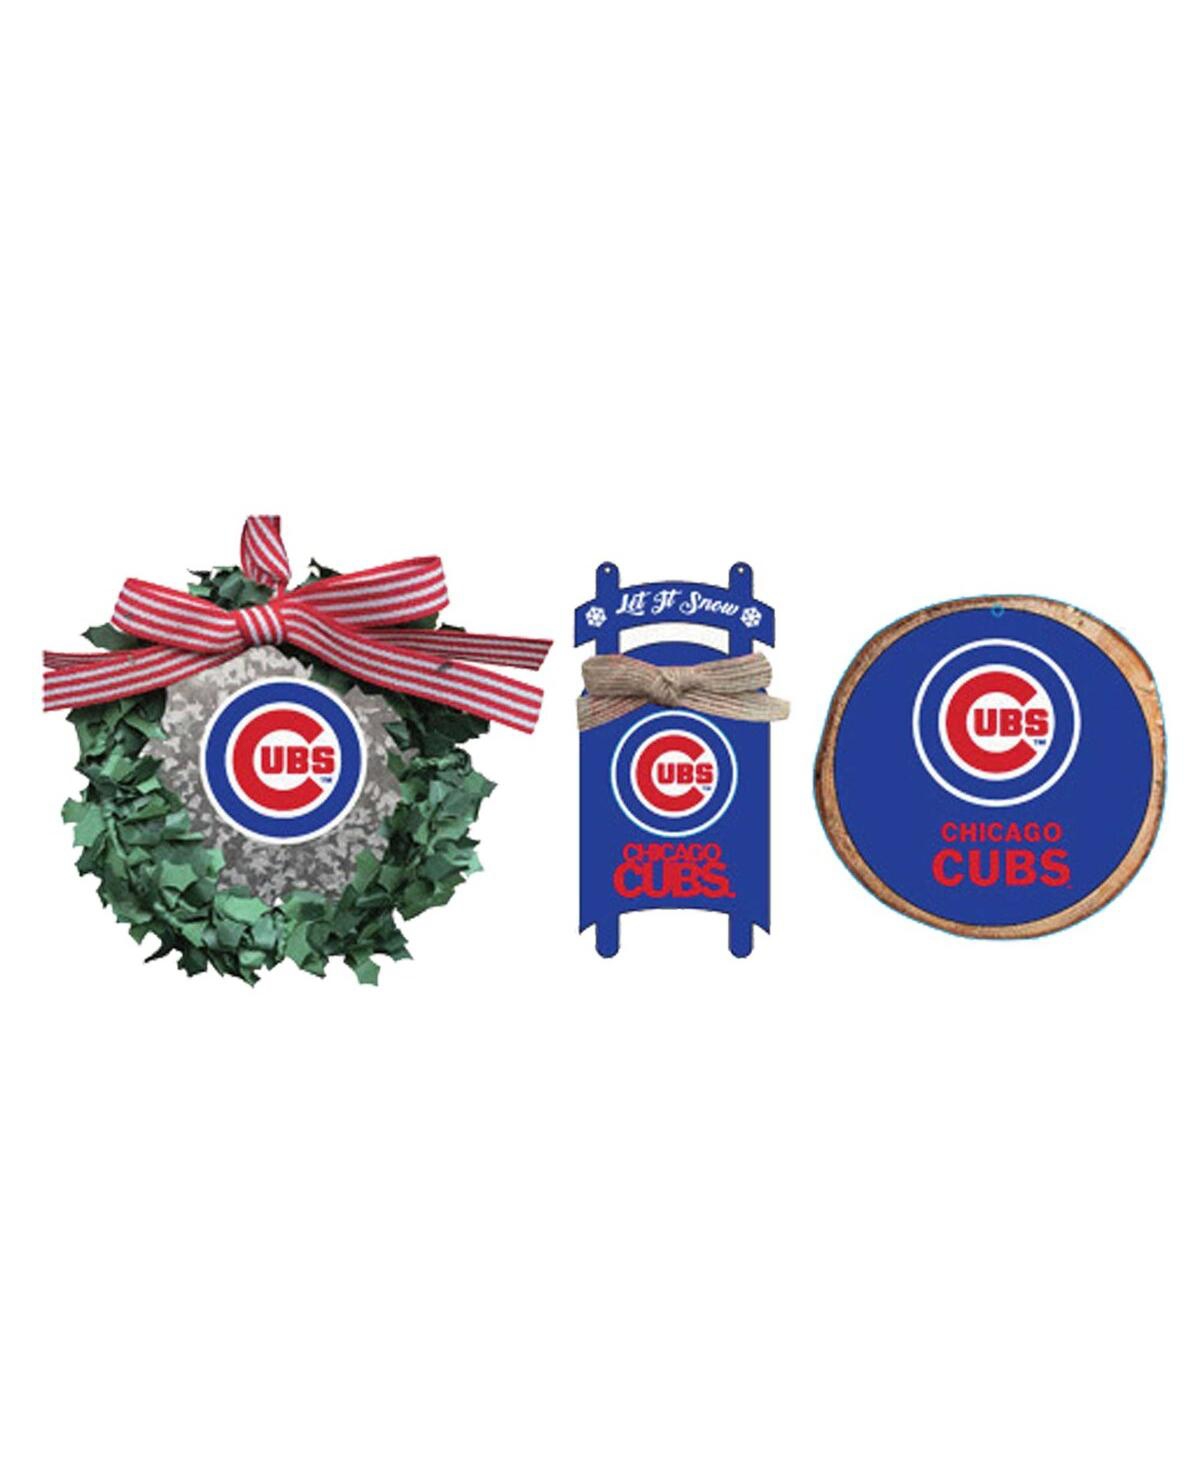 The Memory Company Chicago Cubs Three-Pack Wreath, Sled and Circle Ornament Set - Multi